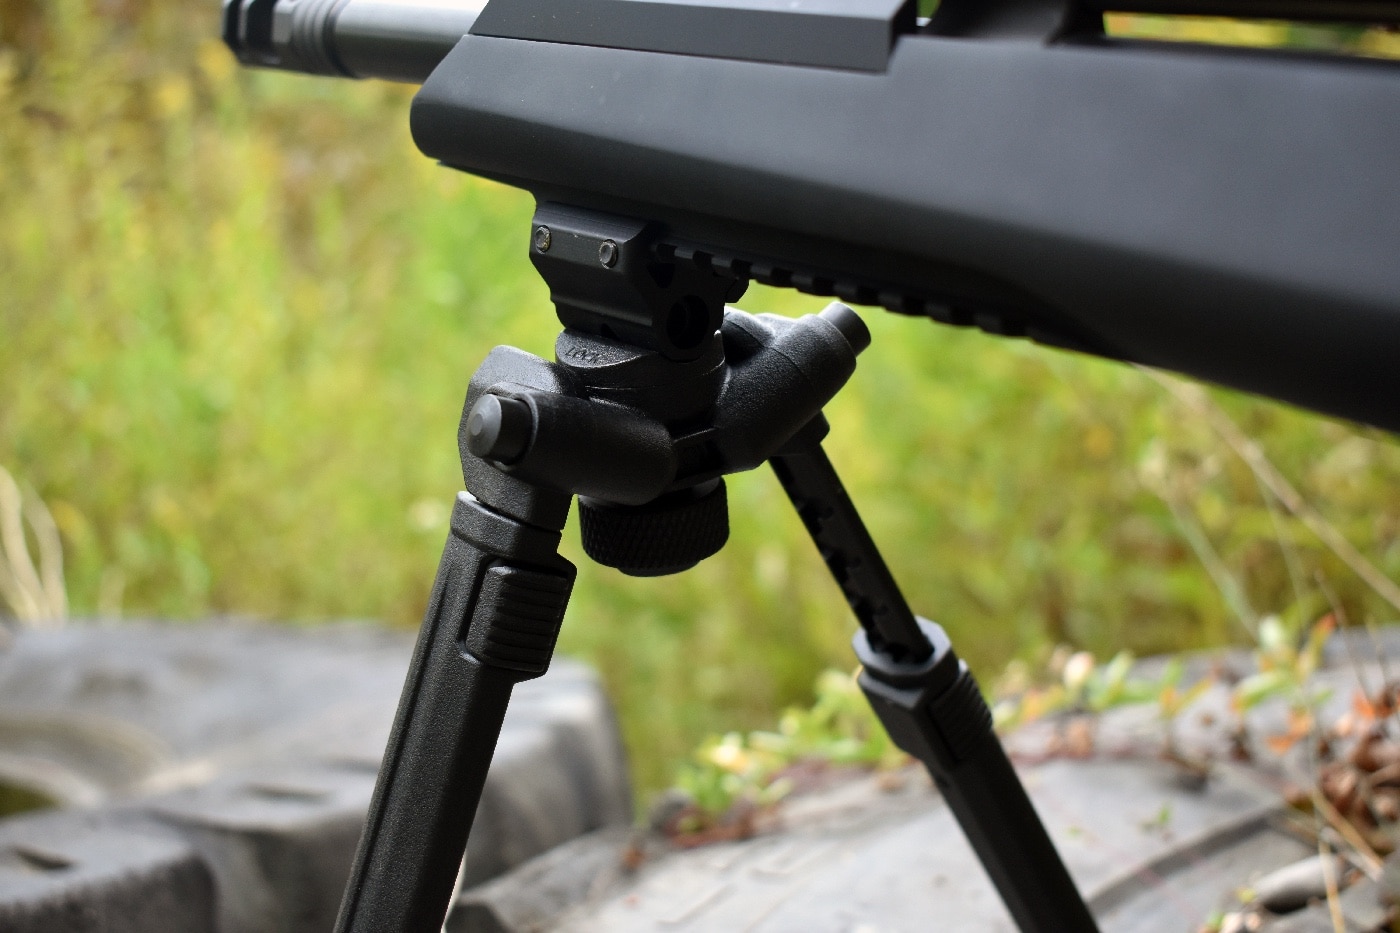 Shown here is the Magpul bipod's head and locking knob. They are easy to access and manipulate as needed.